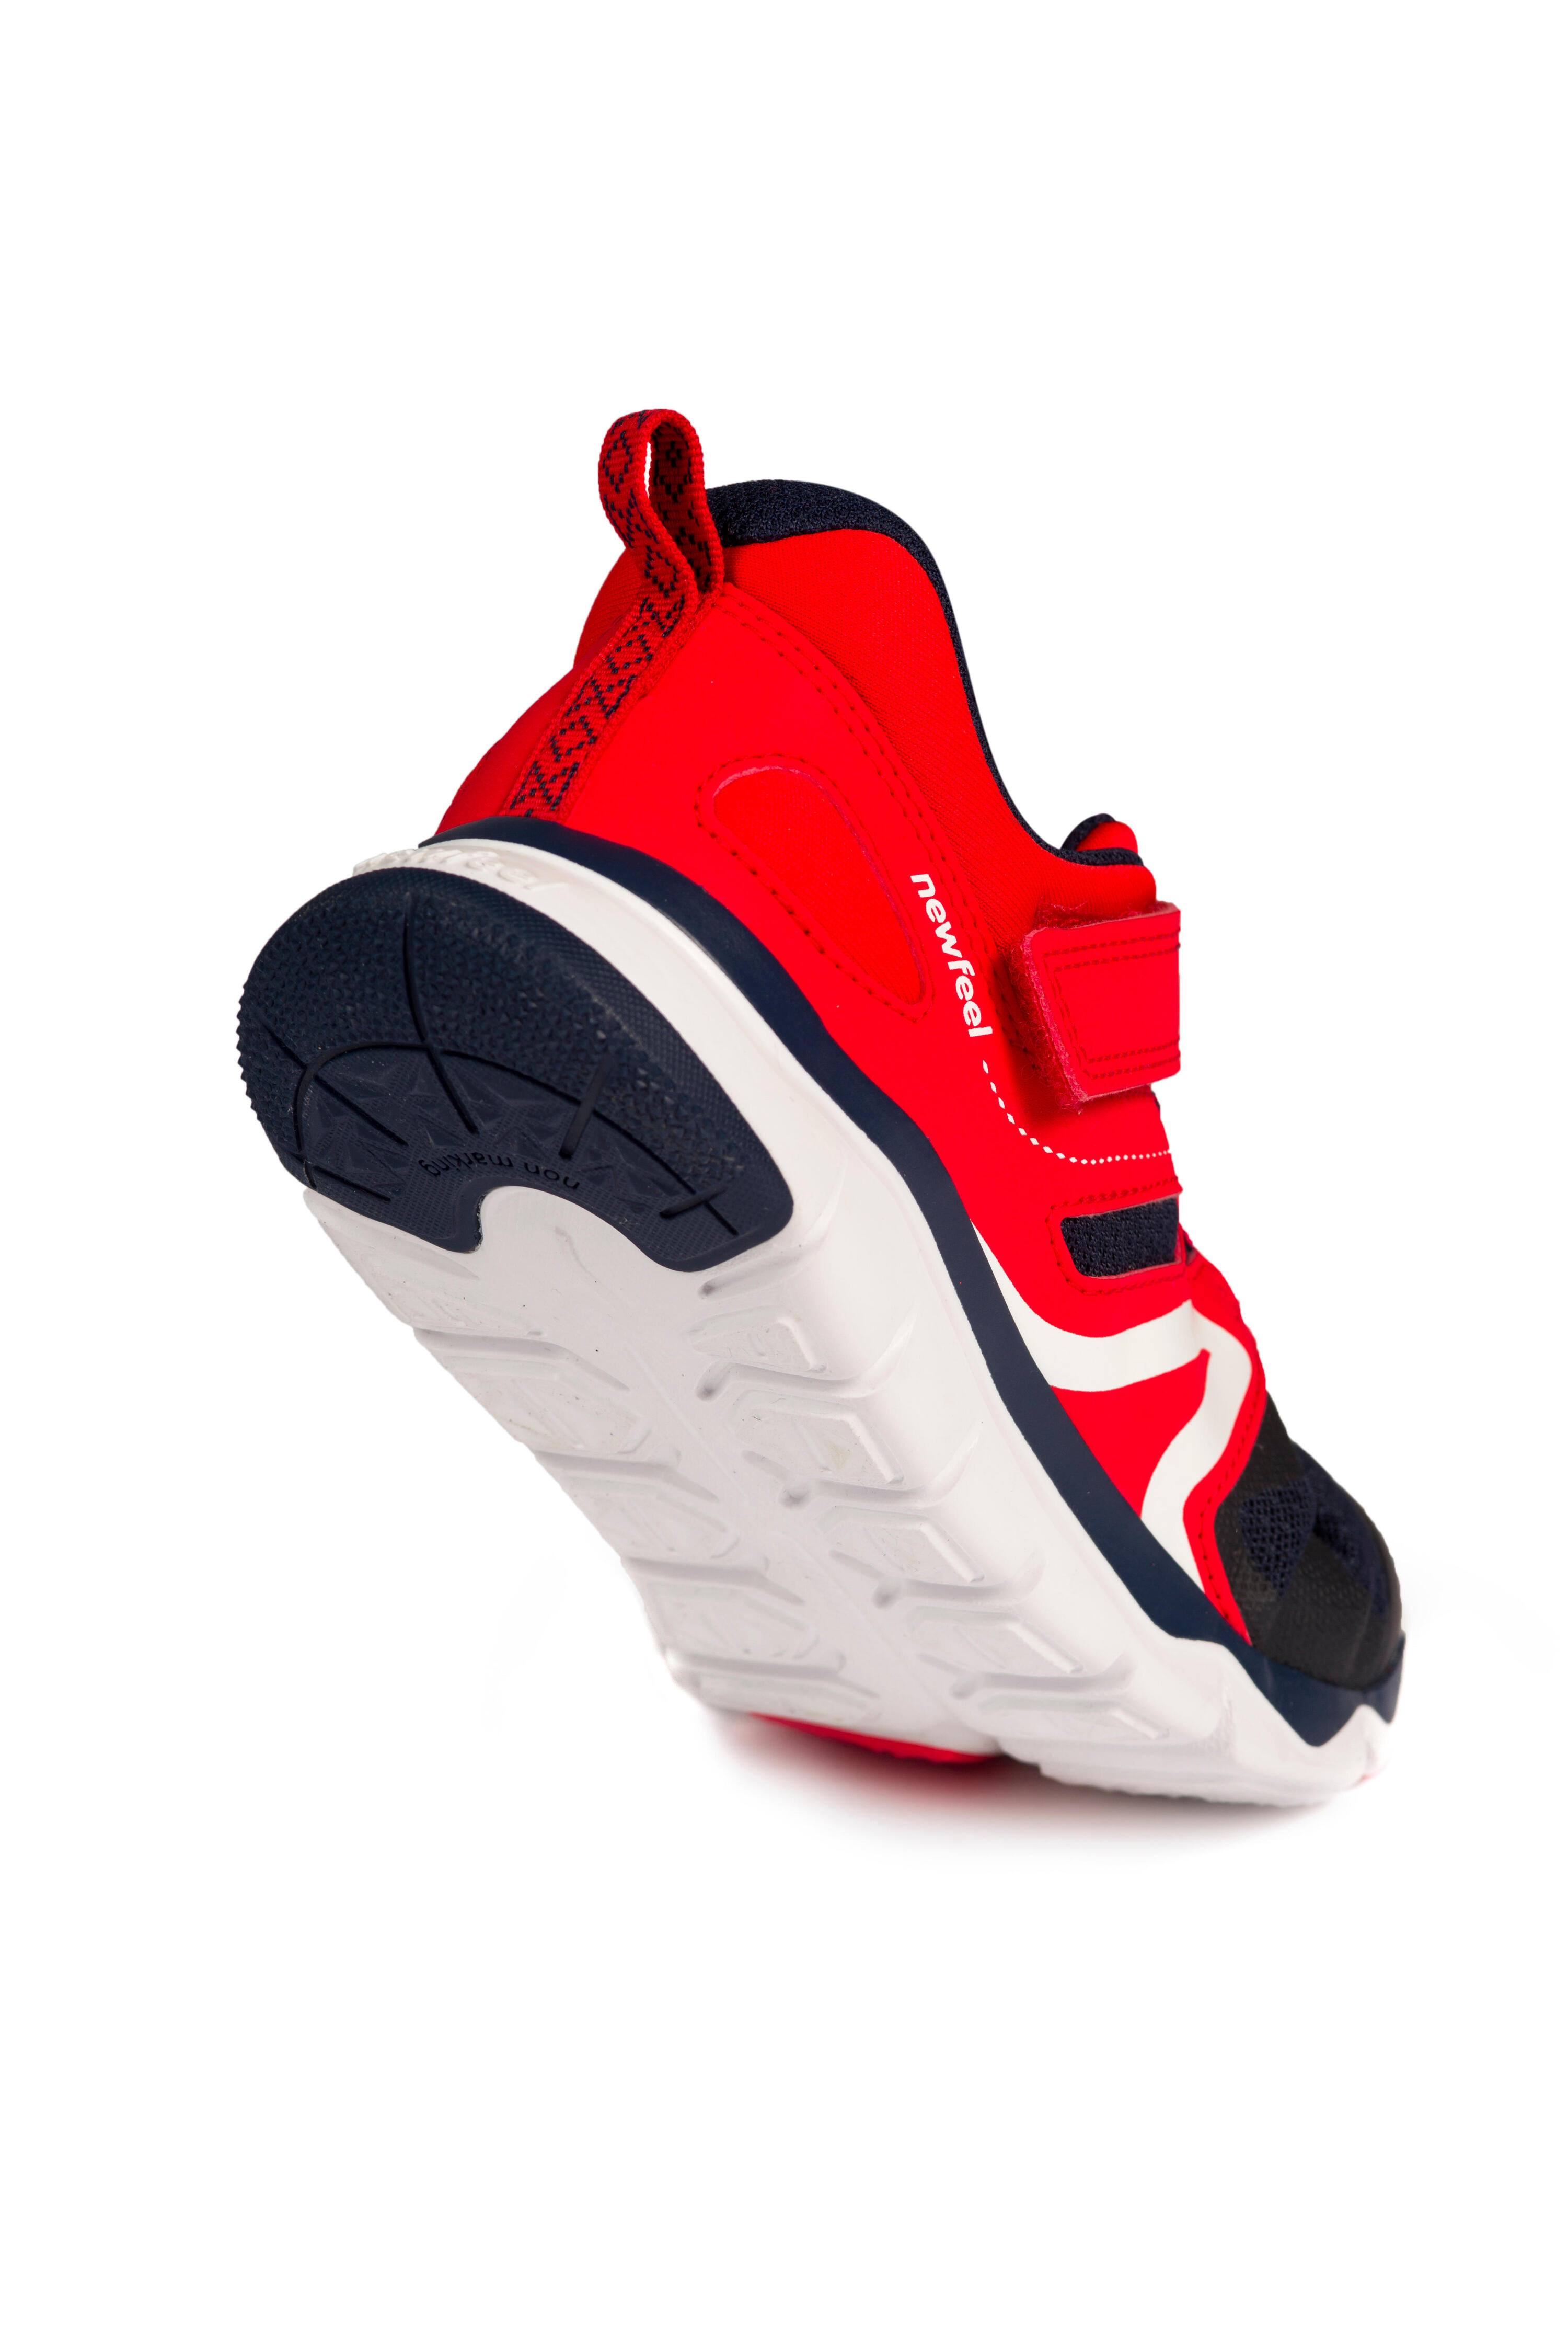 Kids' lightweight and breathable rip-tab trainers, red/black 8/8